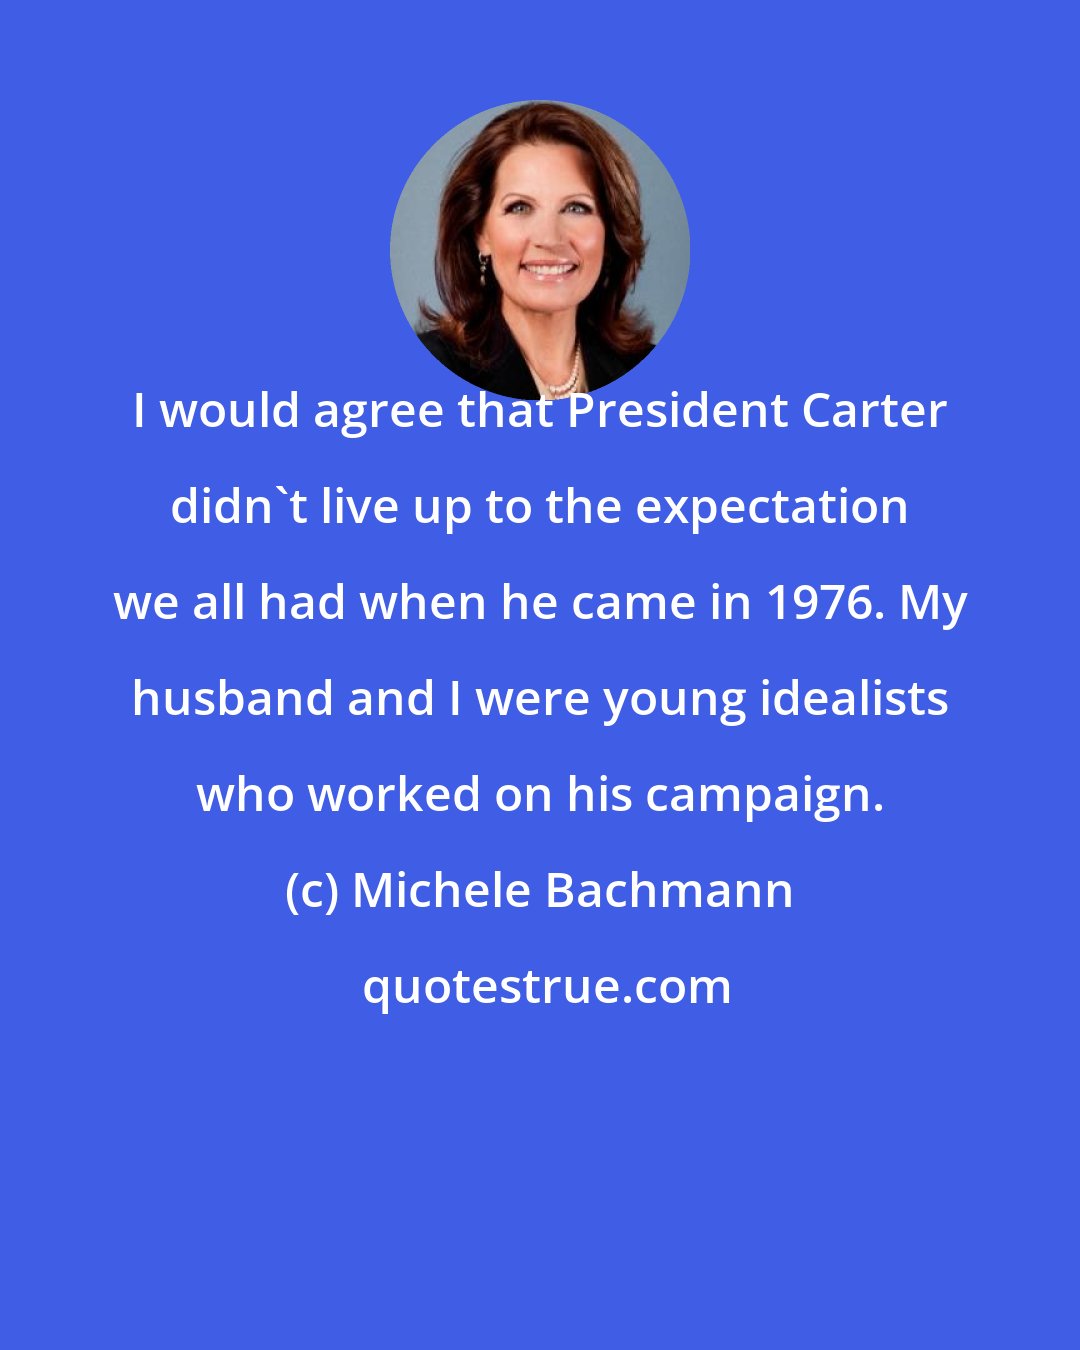 Michele Bachmann: I would agree that President Carter didn't live up to the expectation we all had when he came in 1976. My husband and I were young idealists who worked on his campaign.